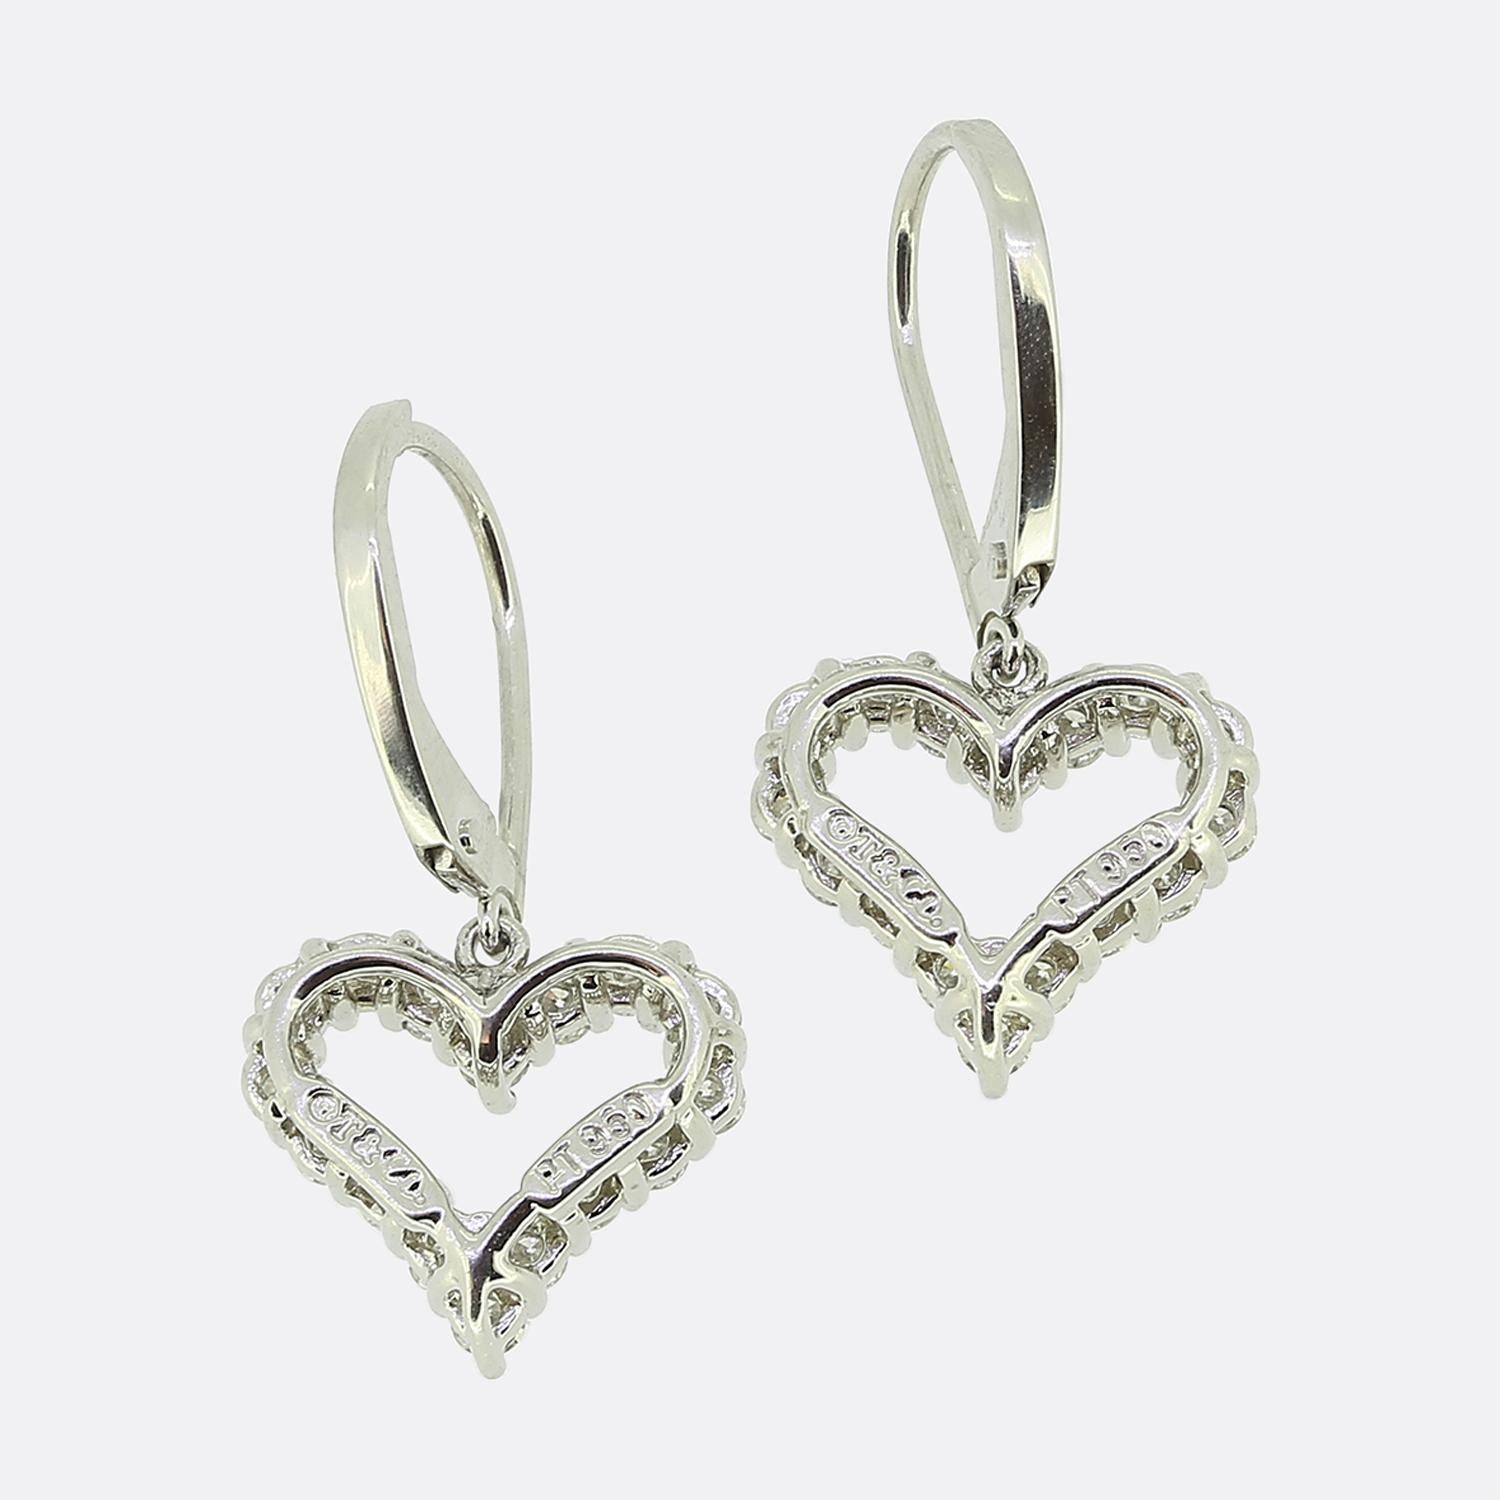 Here we have a delightful pair of diamond drop earrings from the world renowned jewellery designer Tiffany & Co. Each piece has been crafted from platinum into the shape of an open love heart with both frames being set with a single line of